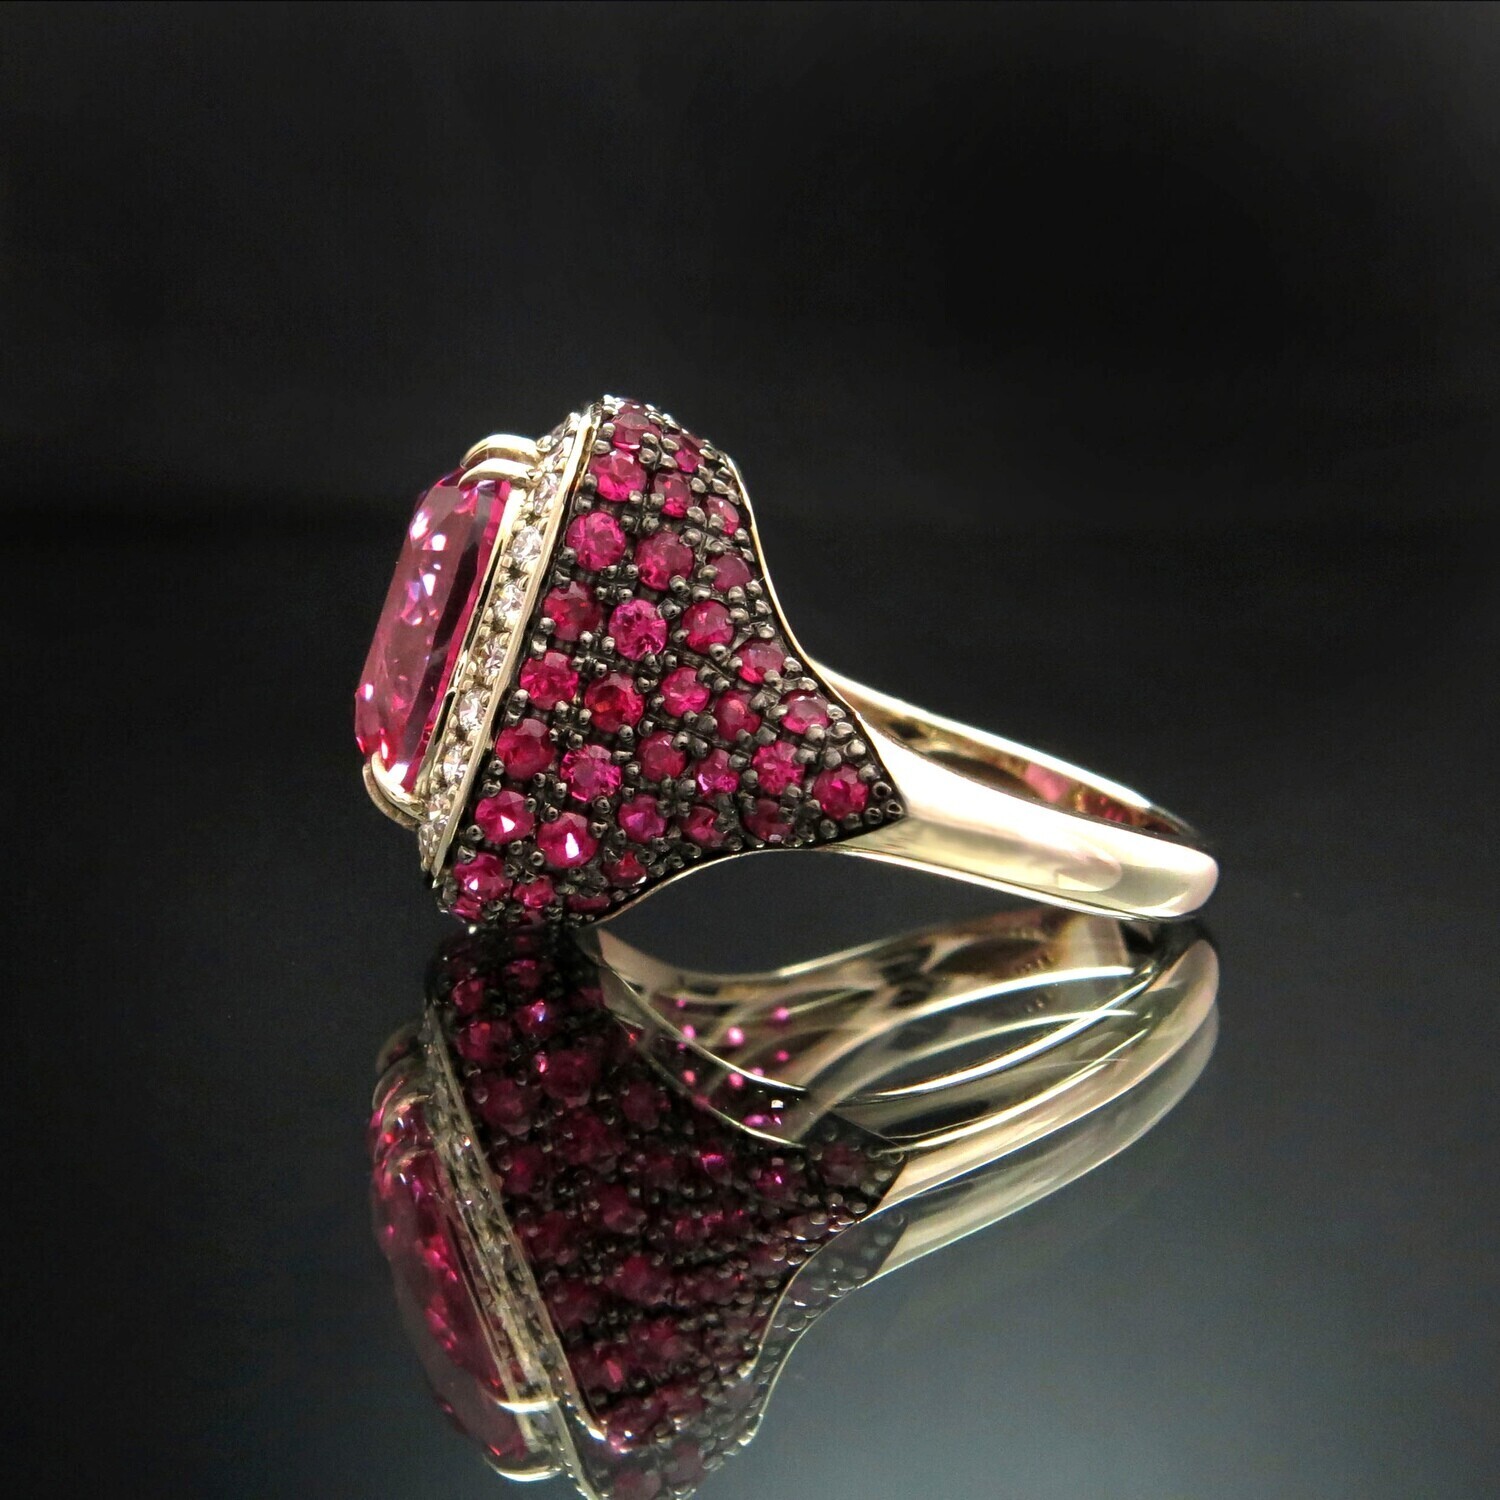 14K Gold Ring with Pink Spinel, Diamonds and Sapphires